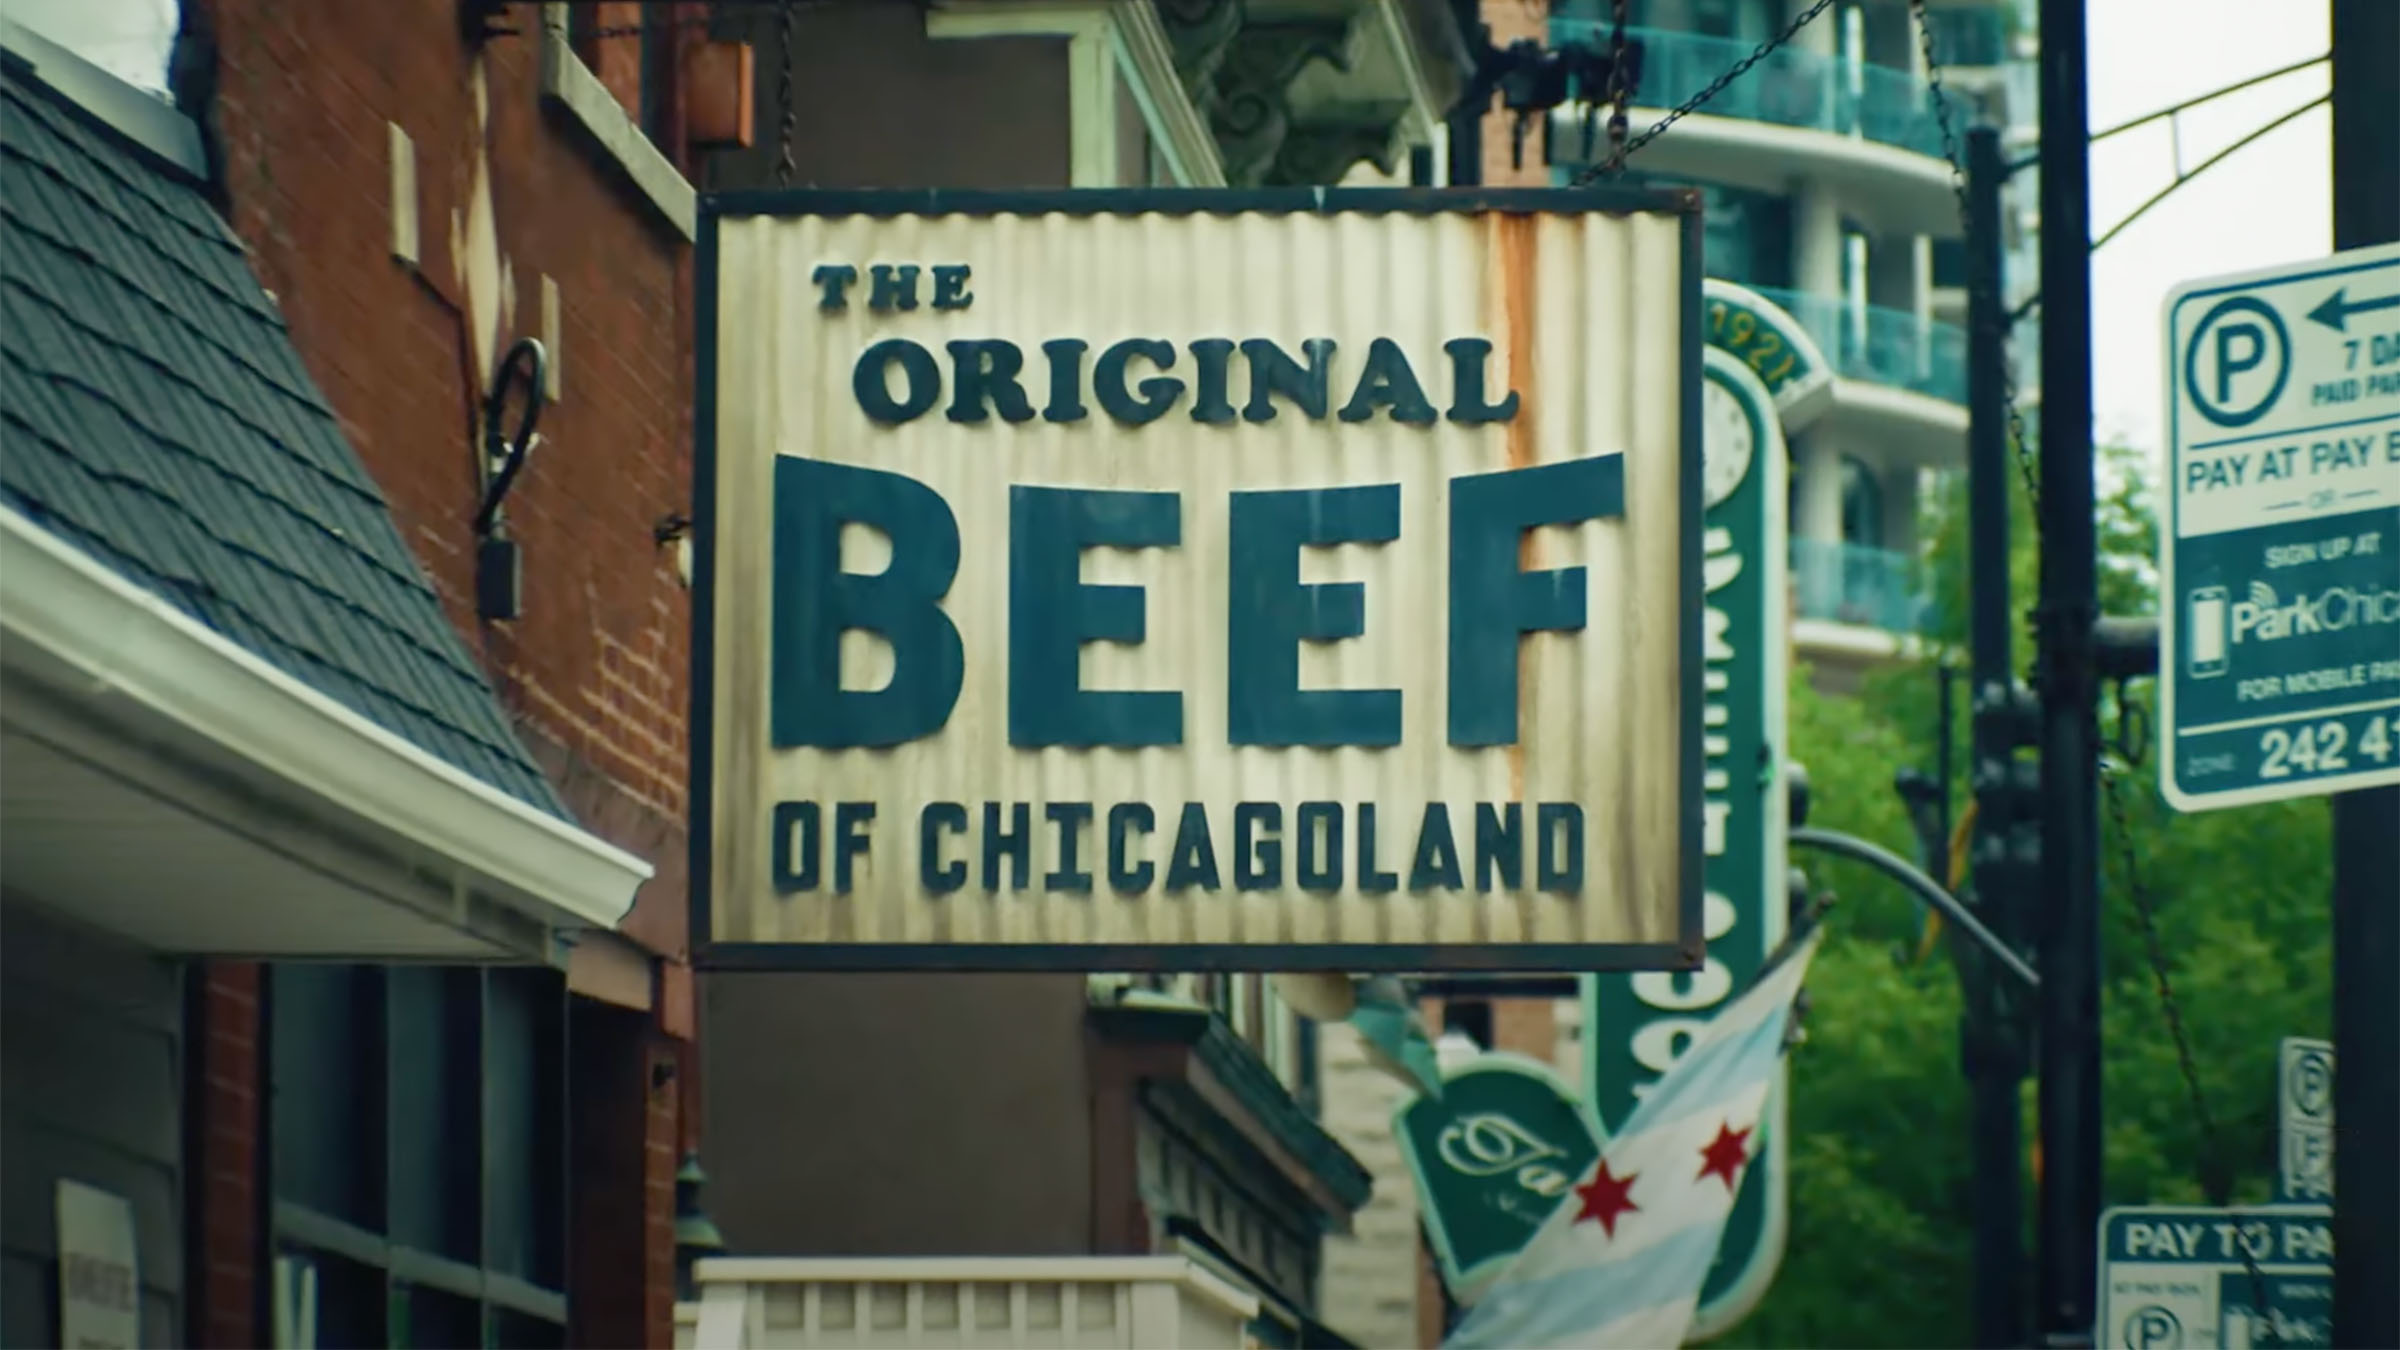 The Beef of Chicagoland